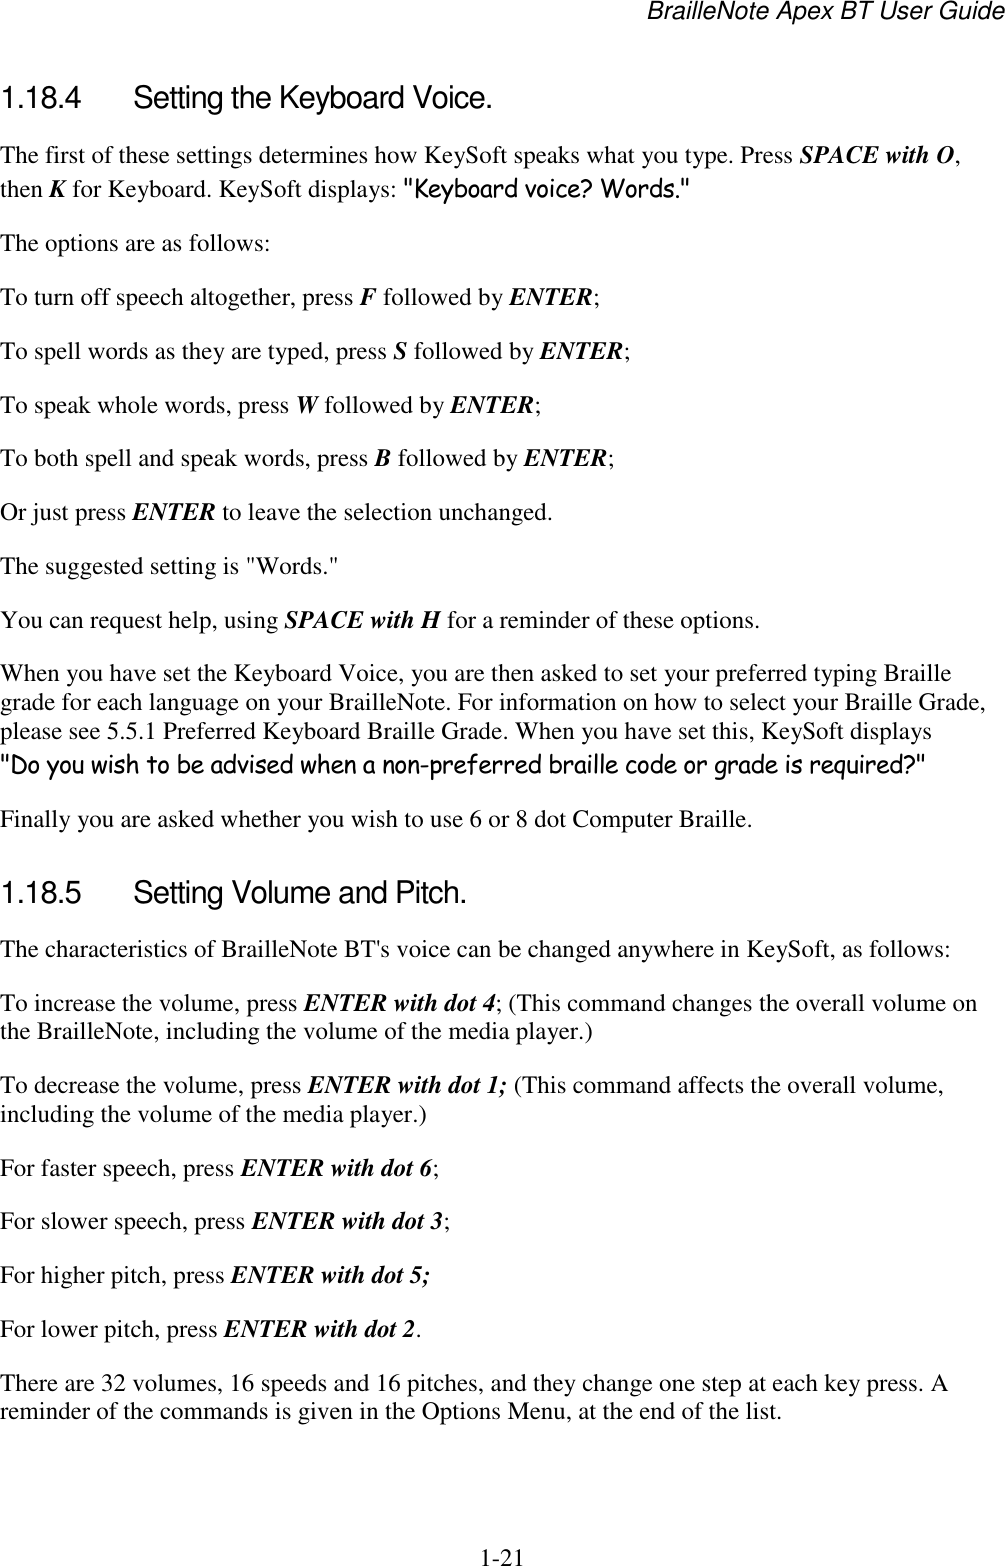 BrailleNote Apex BT User Guide   1-21   1.18.4  Setting the Keyboard Voice. The first of these settings determines how KeySoft speaks what you type. Press SPACE with O, then K for Keyboard. KeySoft displays: &quot;Keyboard voice? Words.&quot; The options are as follows: To turn off speech altogether, press F followed by ENTER; To spell words as they are typed, press S followed by ENTER; To speak whole words, press W followed by ENTER; To both spell and speak words, press B followed by ENTER; Or just press ENTER to leave the selection unchanged. The suggested setting is &quot;Words.&quot; You can request help, using SPACE with H for a reminder of these options. When you have set the Keyboard Voice, you are then asked to set your preferred typing Braille grade for each language on your BrailleNote. For information on how to select your Braille Grade, please see 5.5.1 Preferred Keyboard Braille Grade. When you have set this, KeySoft displays &quot;Do you wish to be advised when a non-preferred braille code or grade is required?&quot;  Finally you are asked whether you wish to use 6 or 8 dot Computer Braille.  1.18.5  Setting Volume and Pitch. The characteristics of BrailleNote BT&apos;s voice can be changed anywhere in KeySoft, as follows: To increase the volume, press ENTER with dot 4; (This command changes the overall volume on the BrailleNote, including the volume of the media player.) To decrease the volume, press ENTER with dot 1; (This command affects the overall volume, including the volume of the media player.) For faster speech, press ENTER with dot 6; For slower speech, press ENTER with dot 3; For higher pitch, press ENTER with dot 5; For lower pitch, press ENTER with dot 2. There are 32 volumes, 16 speeds and 16 pitches, and they change one step at each key press. A reminder of the commands is given in the Options Menu, at the end of the list.   